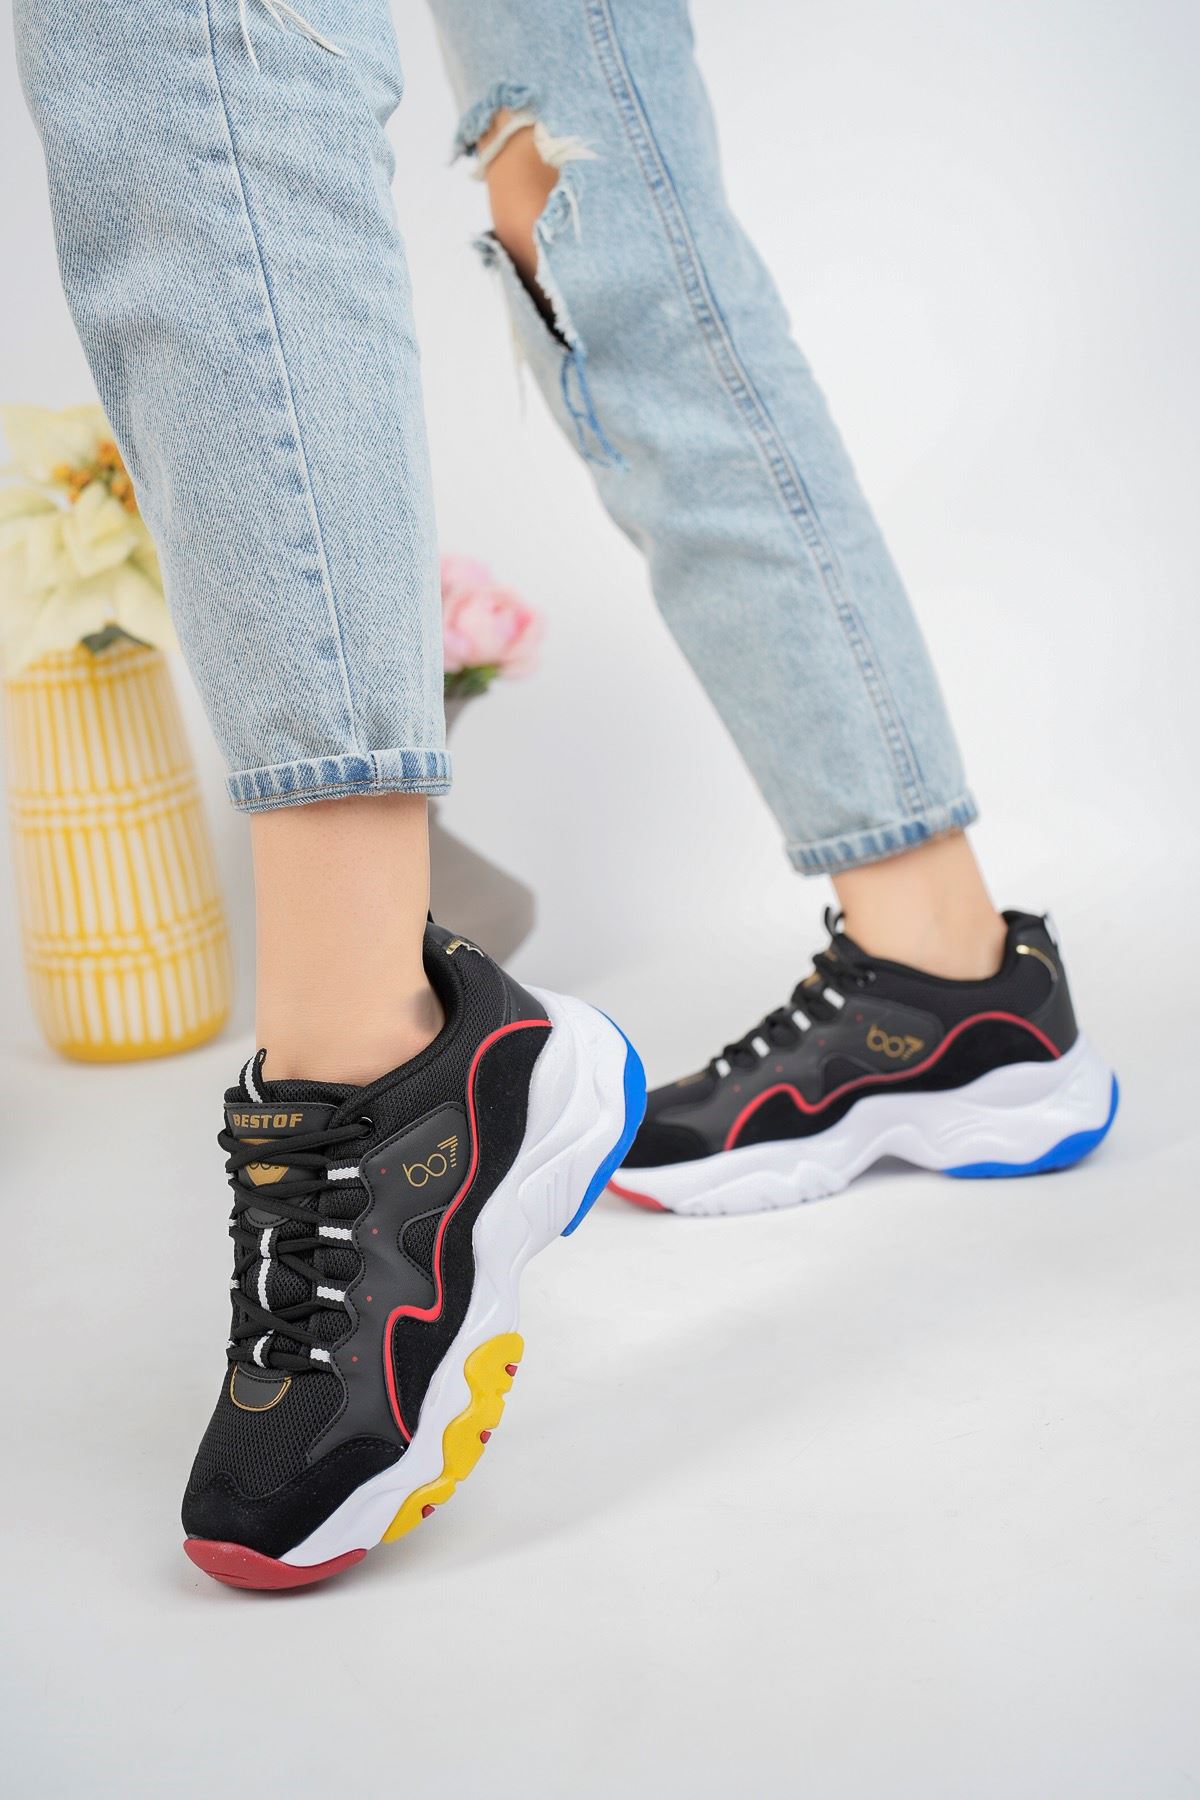 High Sole Black Black Garnisi Red Women's Sneakers